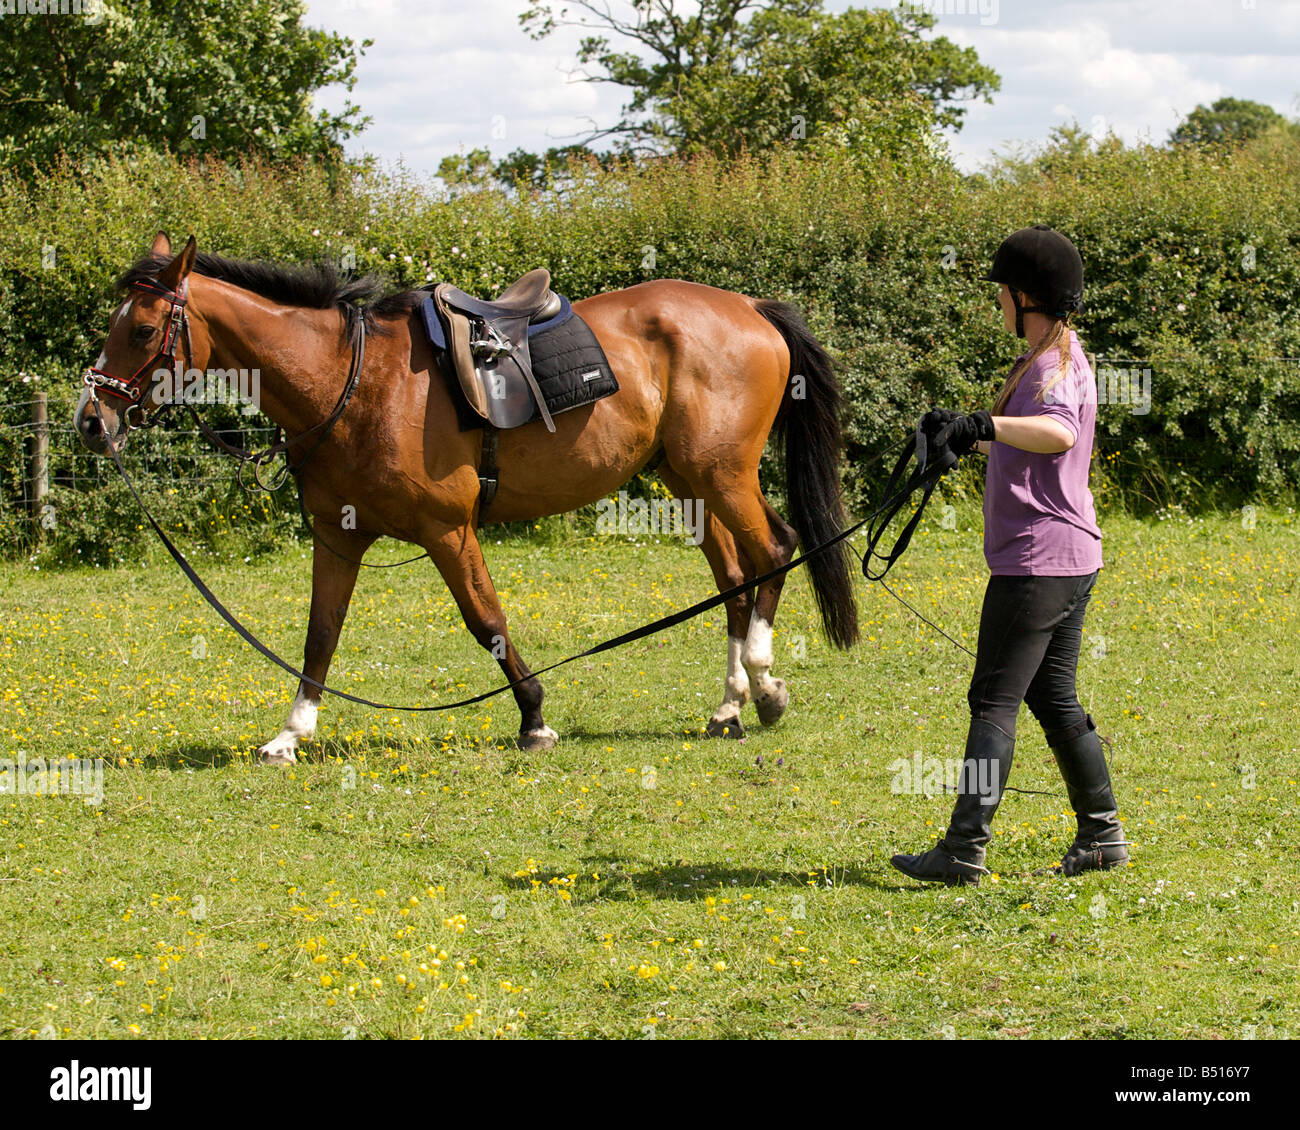 Rider lunging a horse. Stock Photo